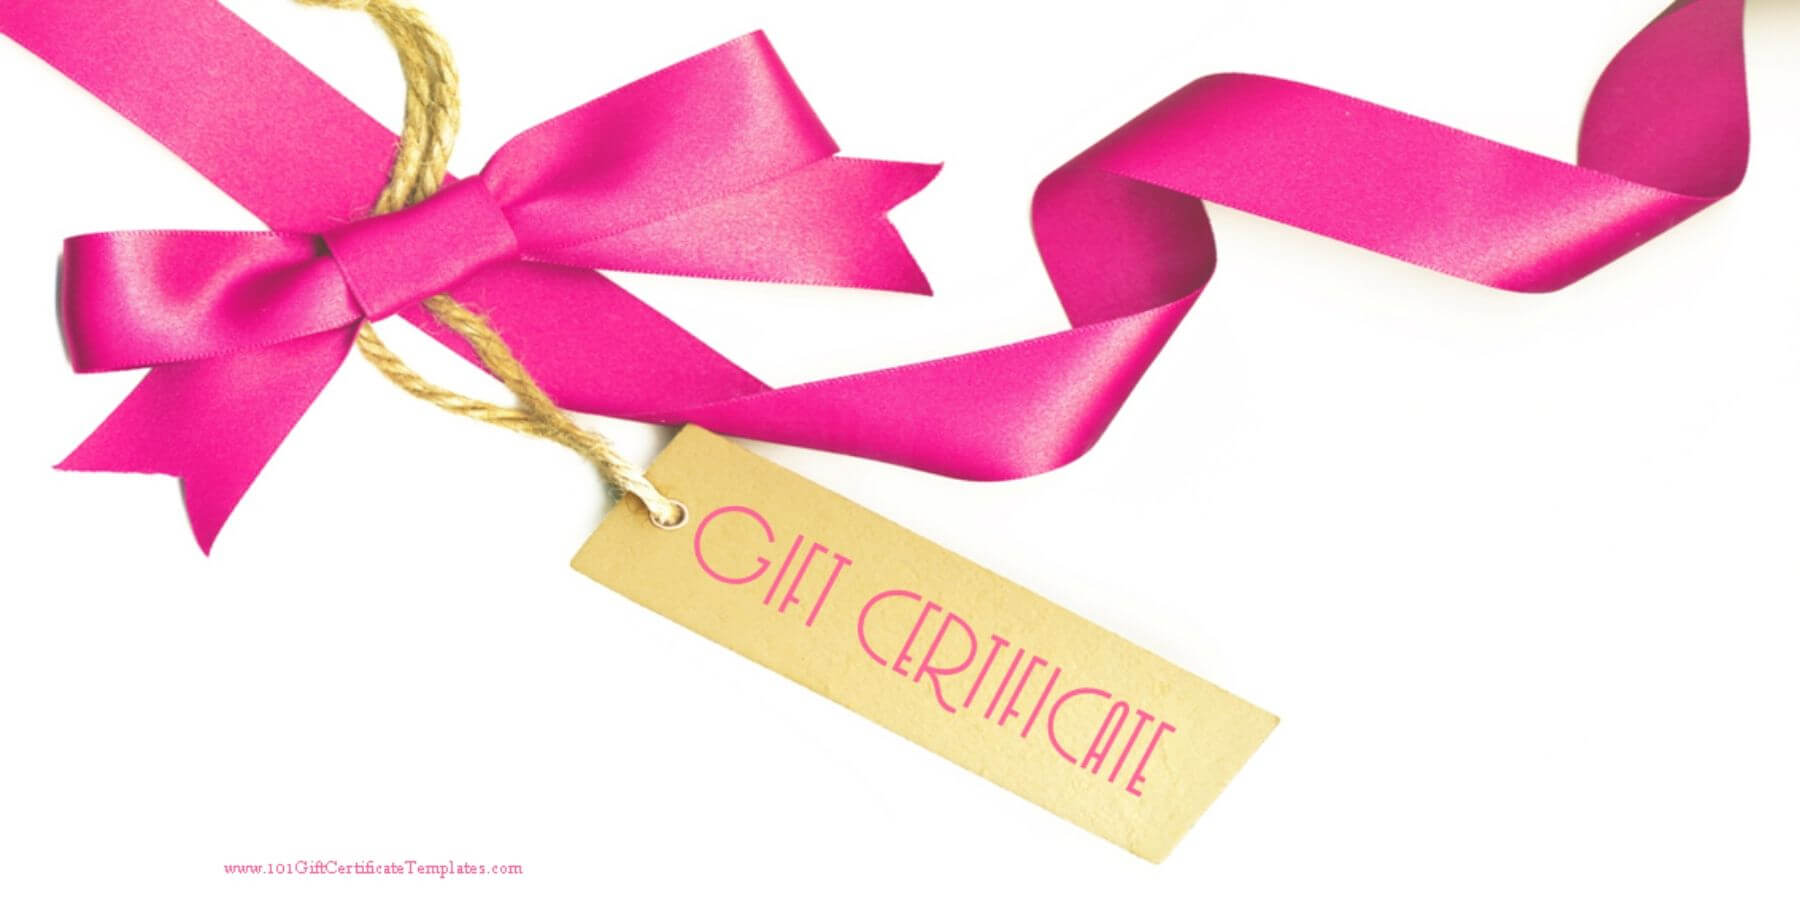 Gift Certificate With A White Background And A Pink Ribbon With Regard To Pink Gift Certificate Template